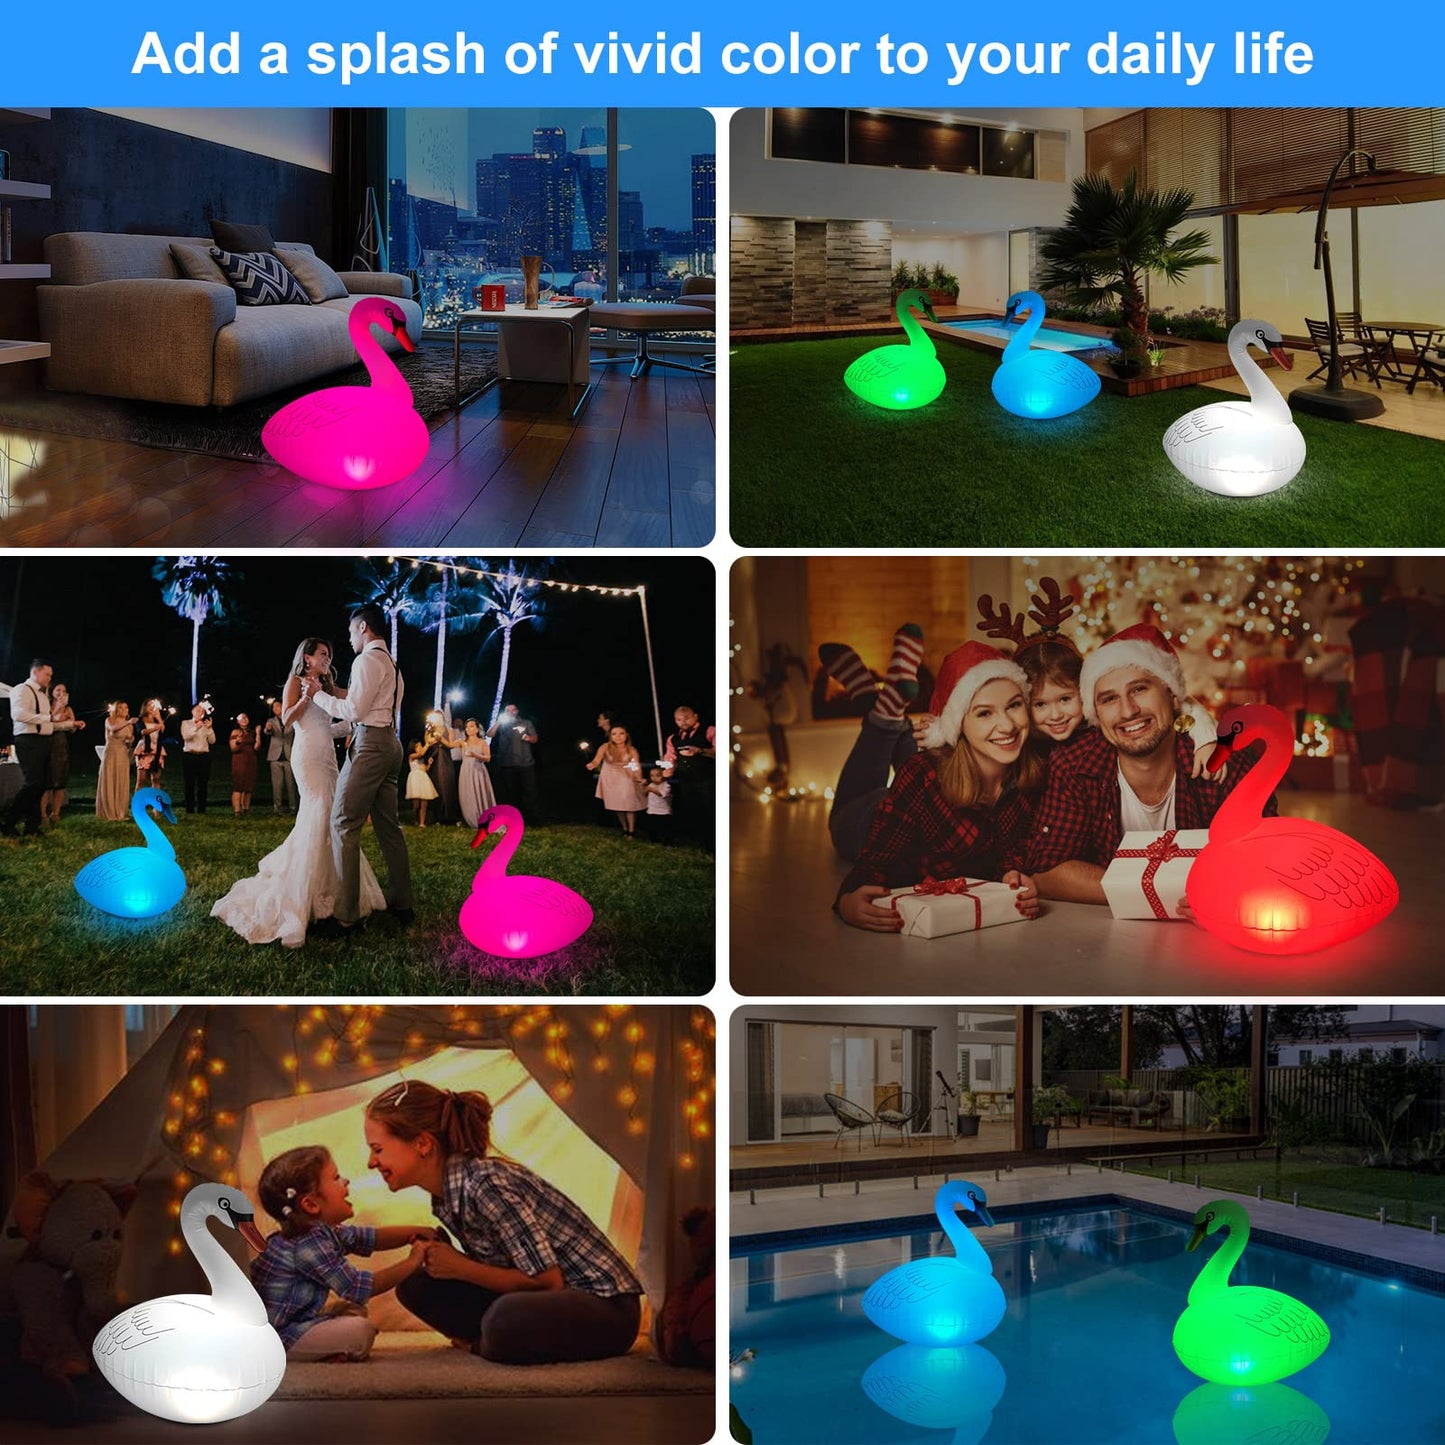 Goallim Floating Pool Lights Solar Rechargeable 2PCS, Waterproof Inflatable Swan Pool Lights, Glow in The Dark Color Changing LED for Backyard Spa Patio Wedding Party Decor